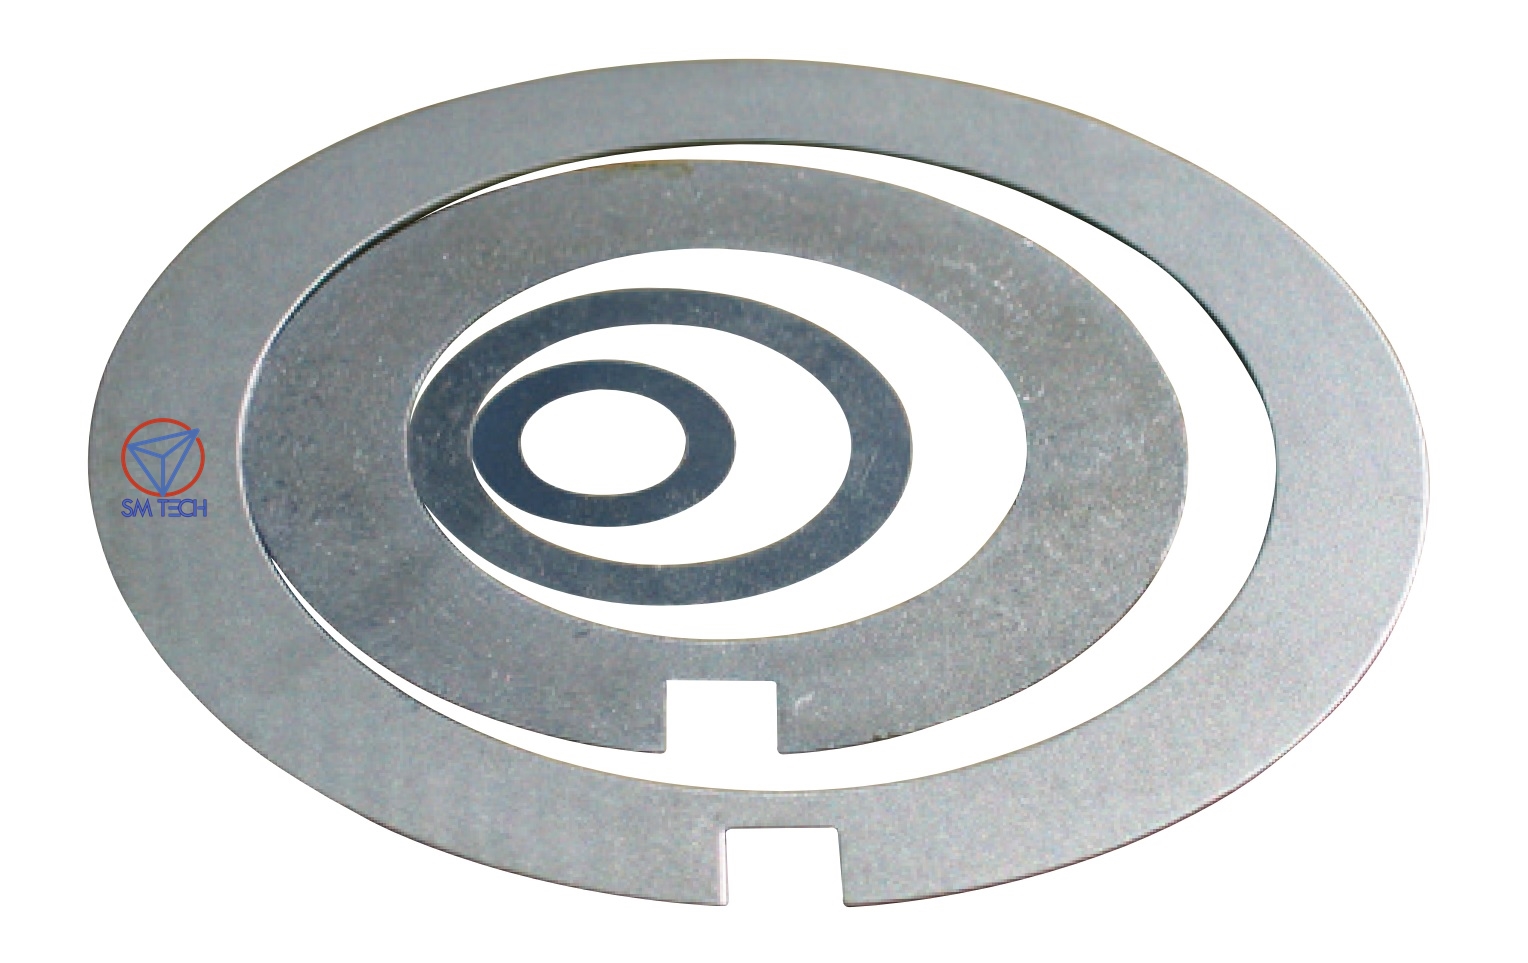 Die shims for thick turret punching machines - SM TECH